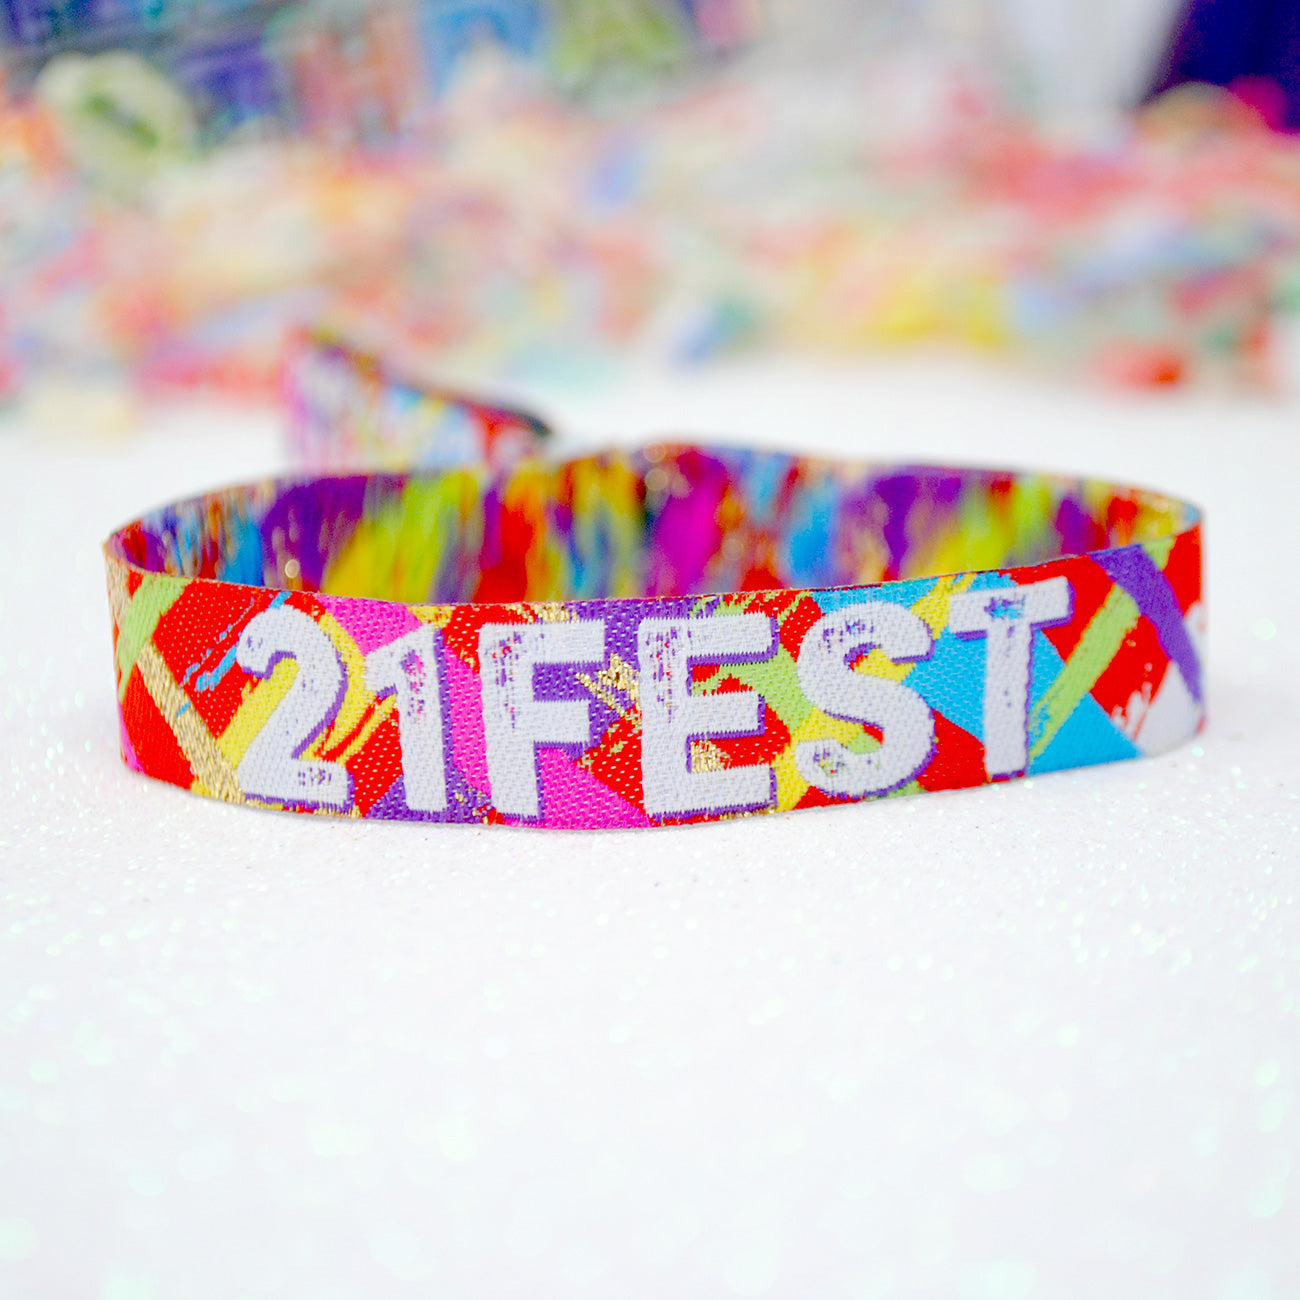 21FEST 21st birthday party wristbands